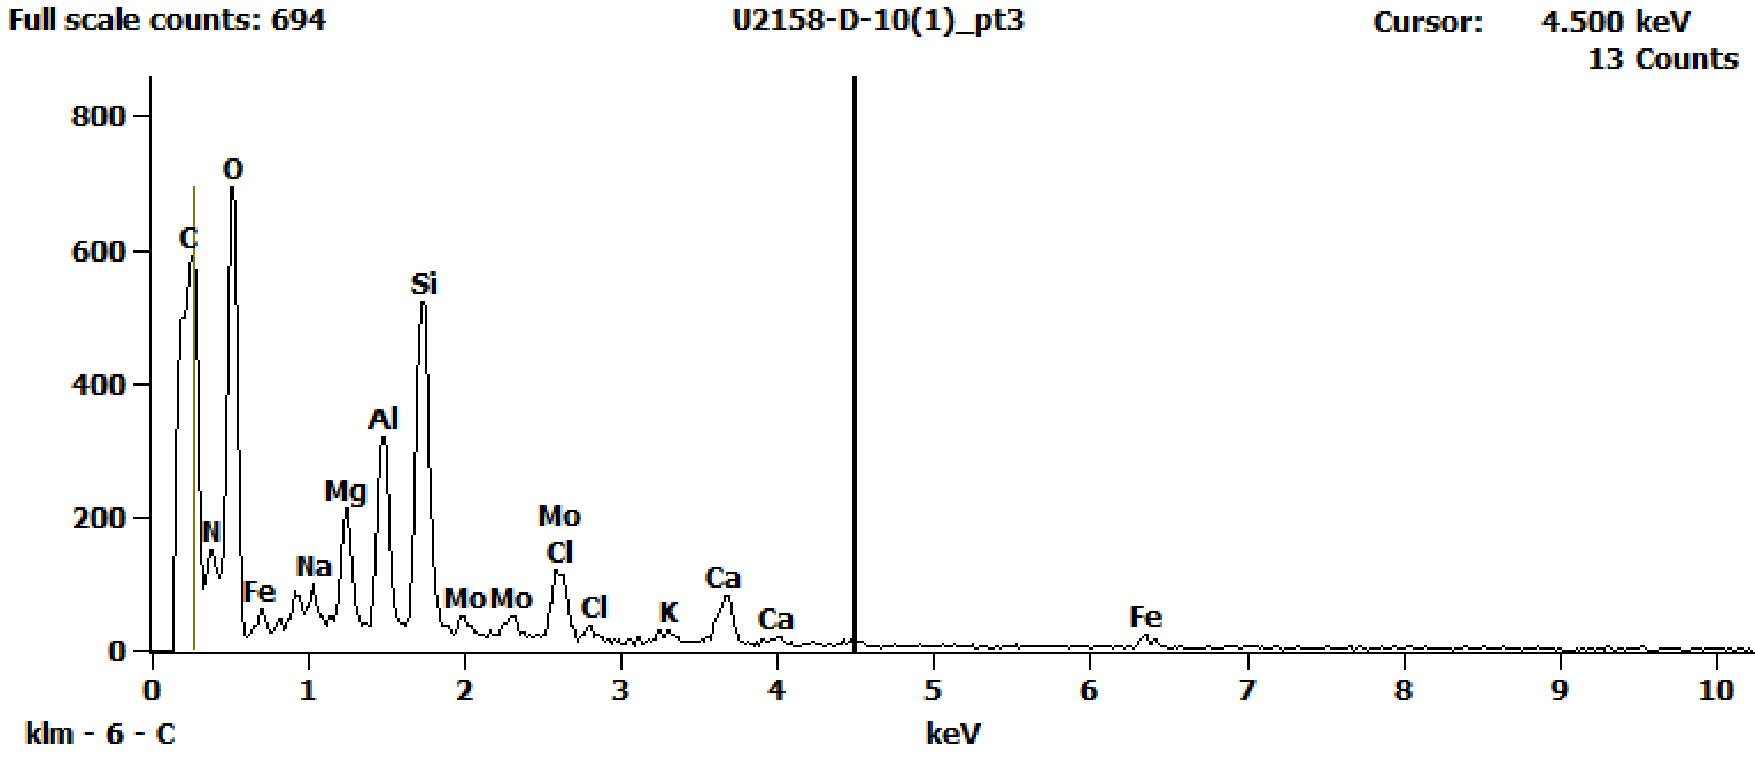 EDS Spectra for sample U2158-D-10 taken at test area 3. The test area is labeled in the particle SEM photo.